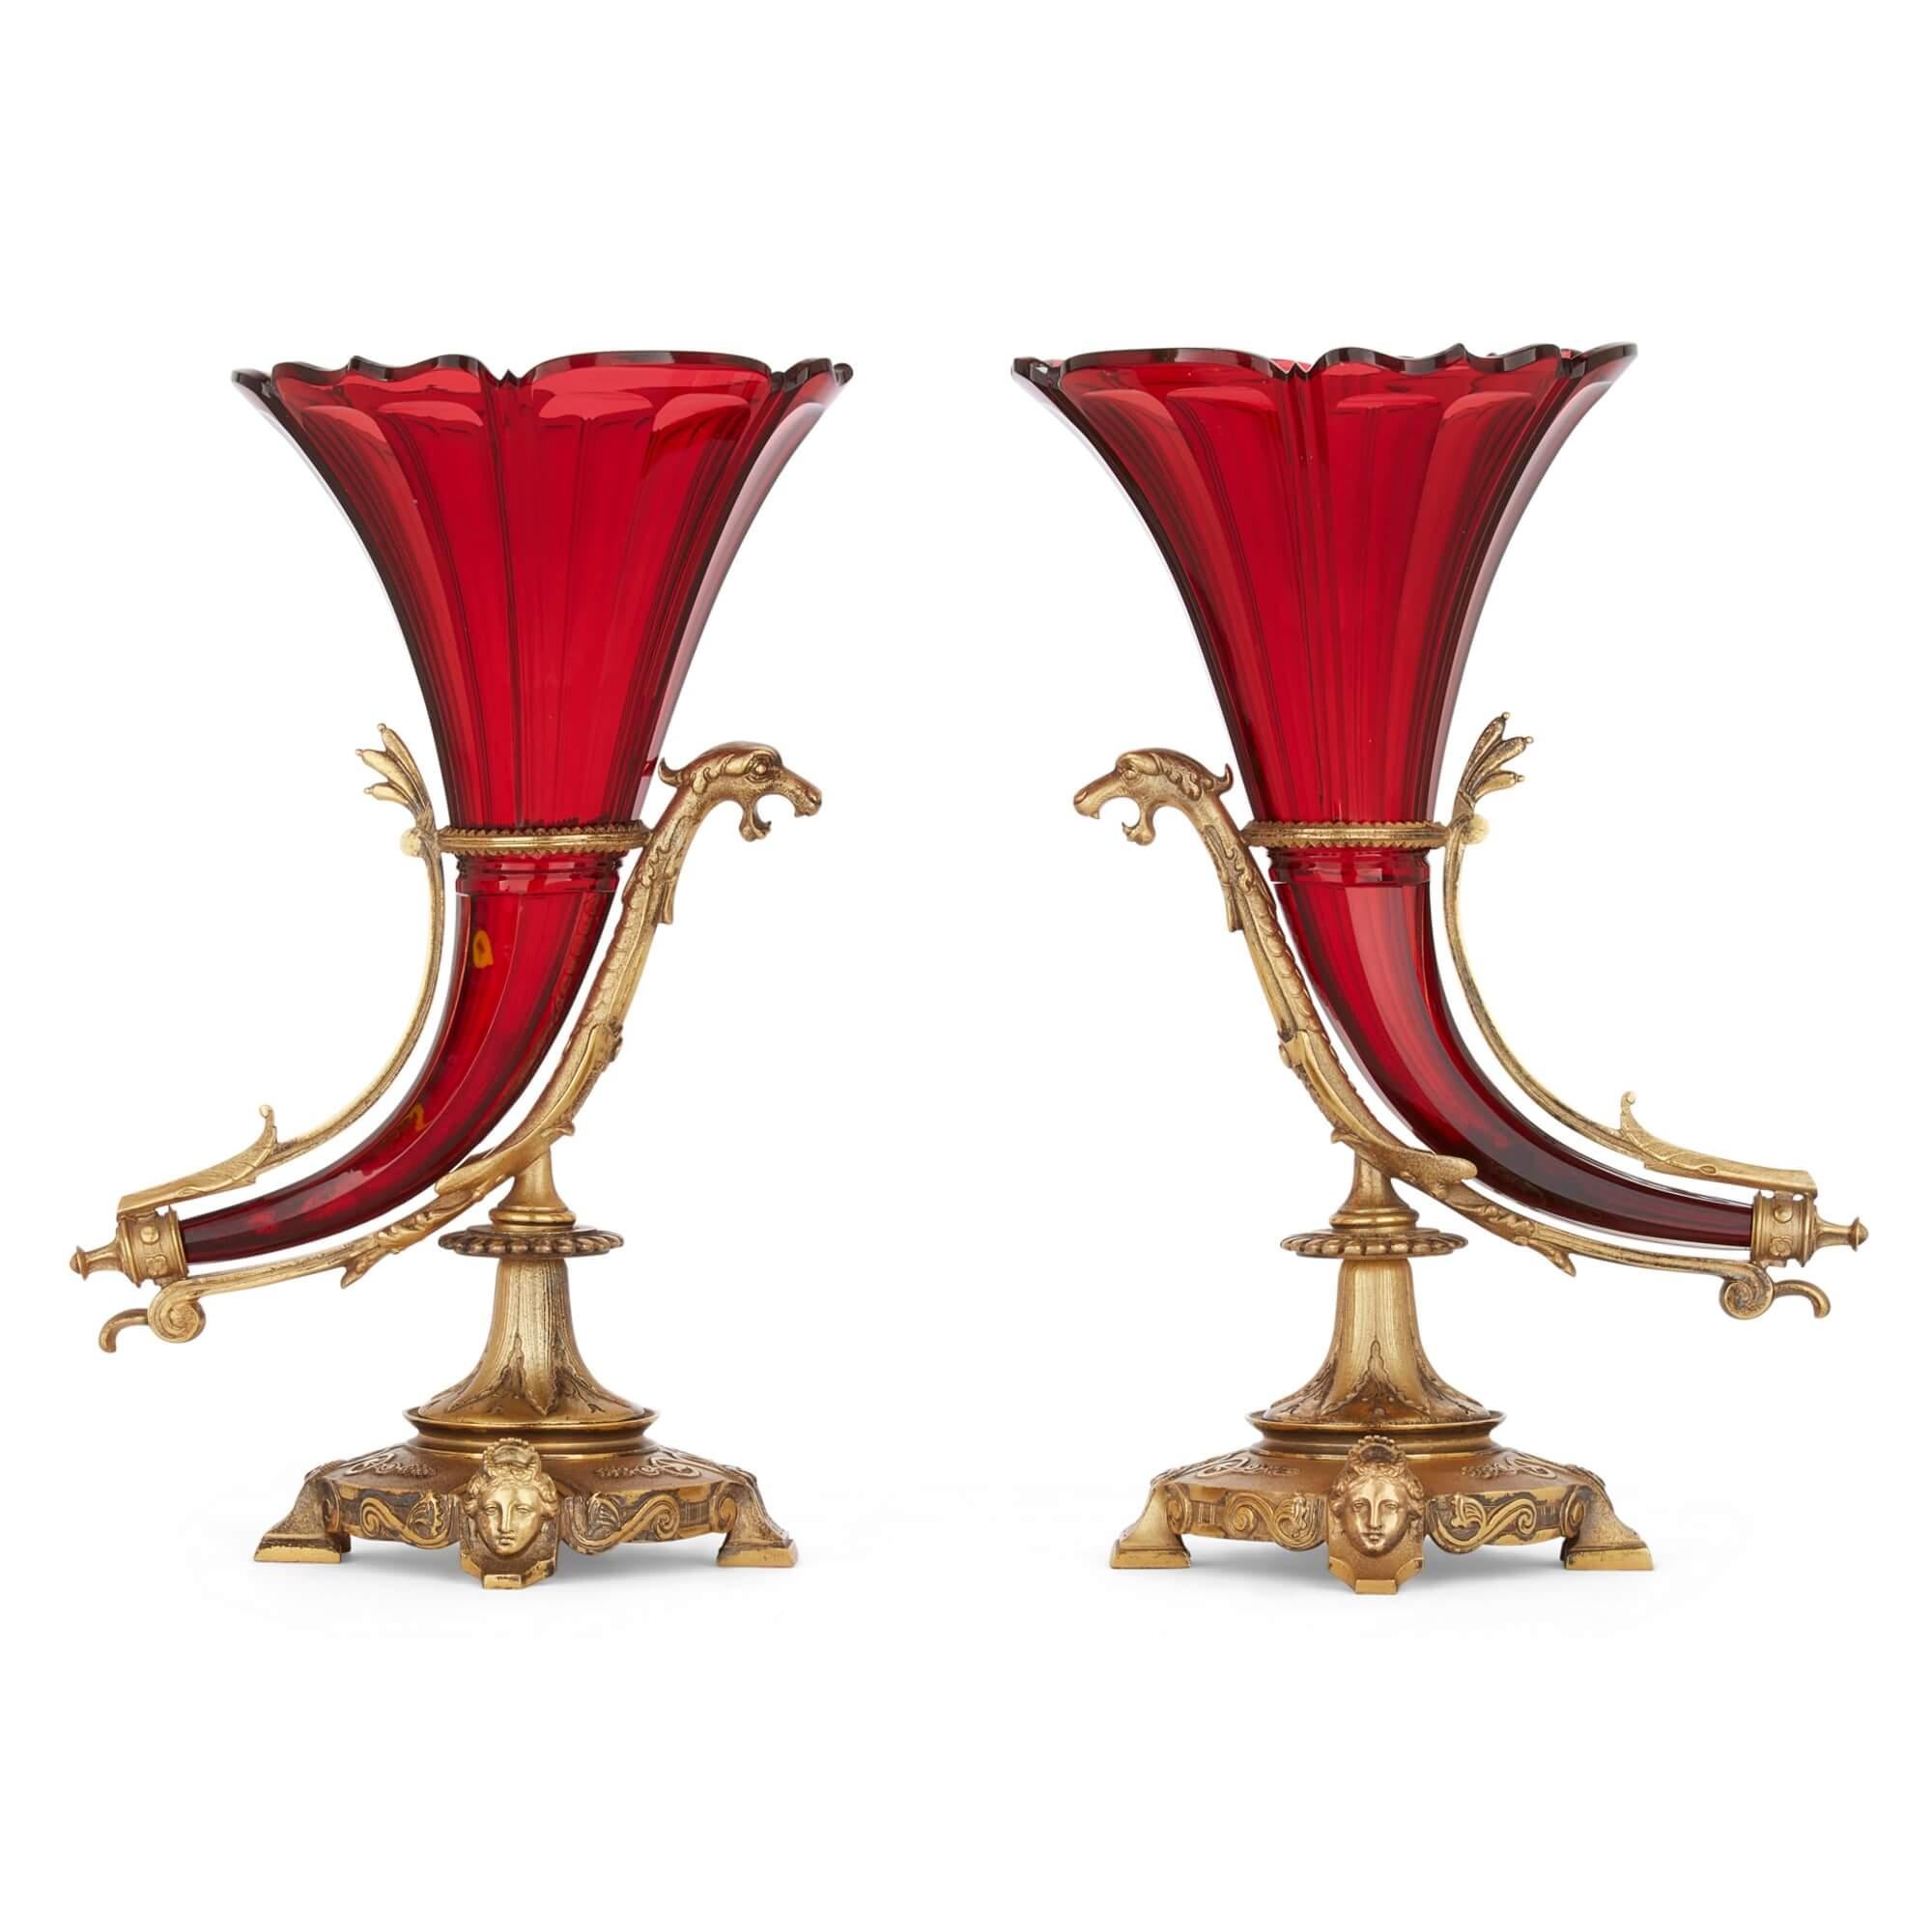 Neoclassical Large Antique Ormolu Mounted Red Glass Centrepiece Suite by Baccarat